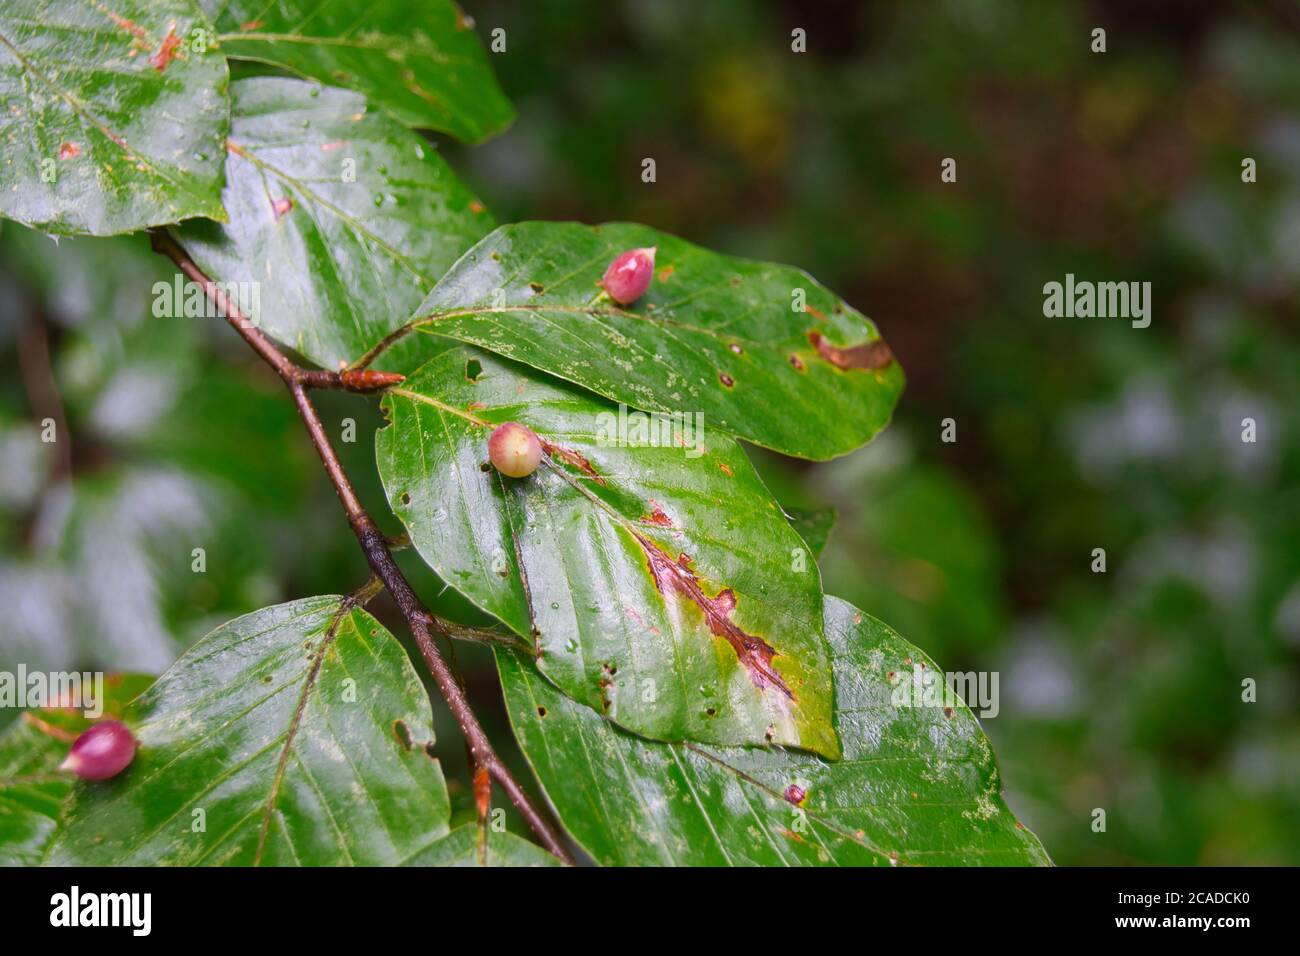 Macro of many Galls or cecidia outgrow of Galls wasp eggs on the surface of Fagus leaves Stock Photo